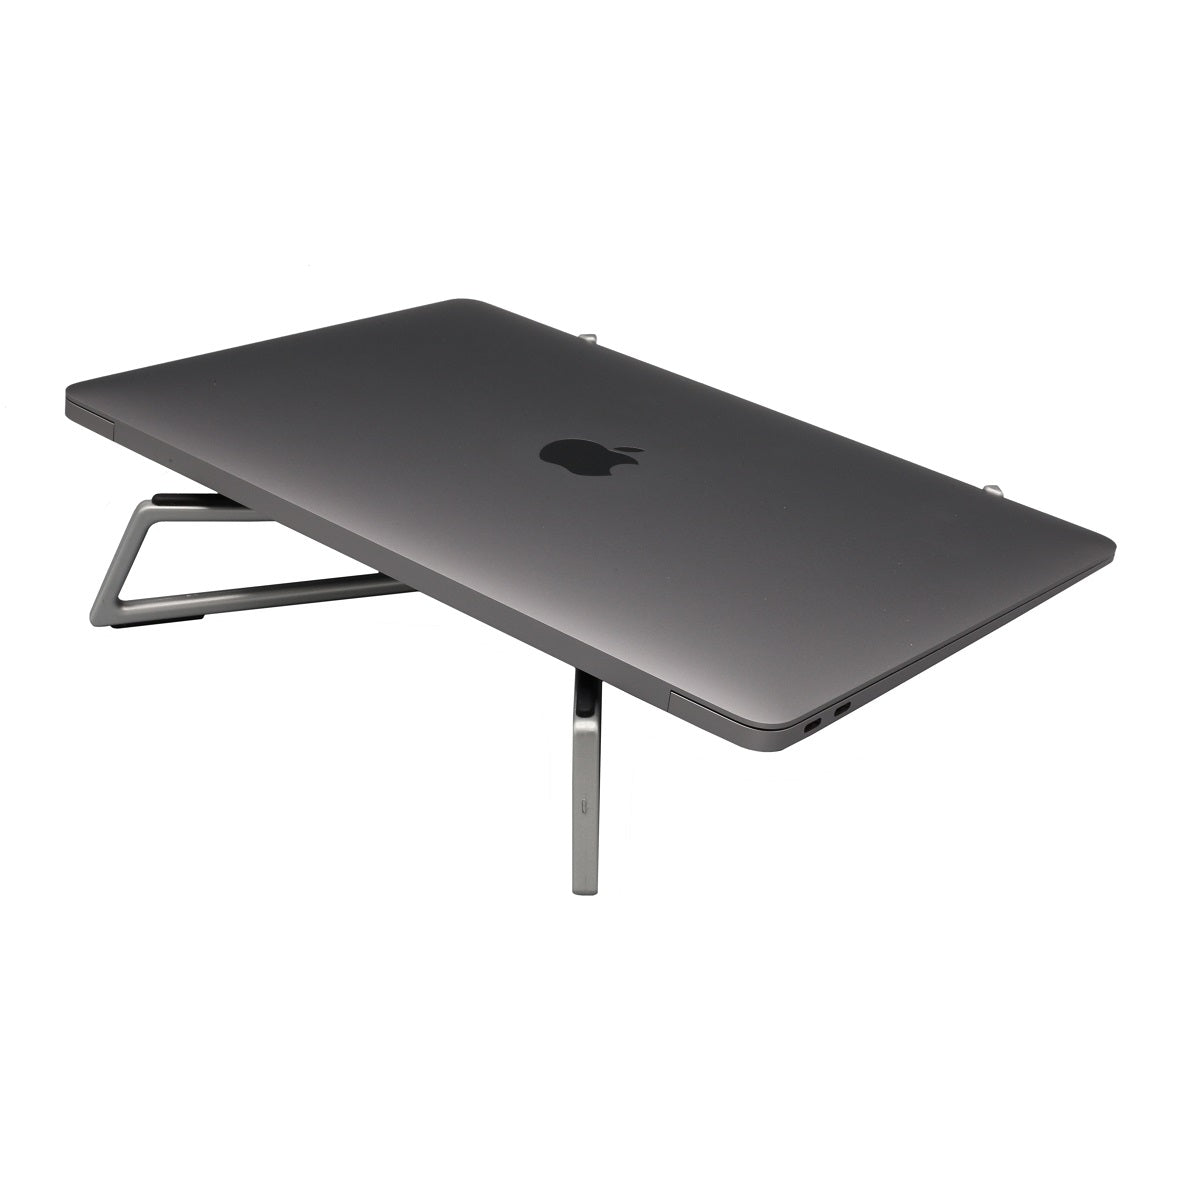 The FlexVerk Laptop Stand in silver shown holding a closed Macbook Air on a white background.